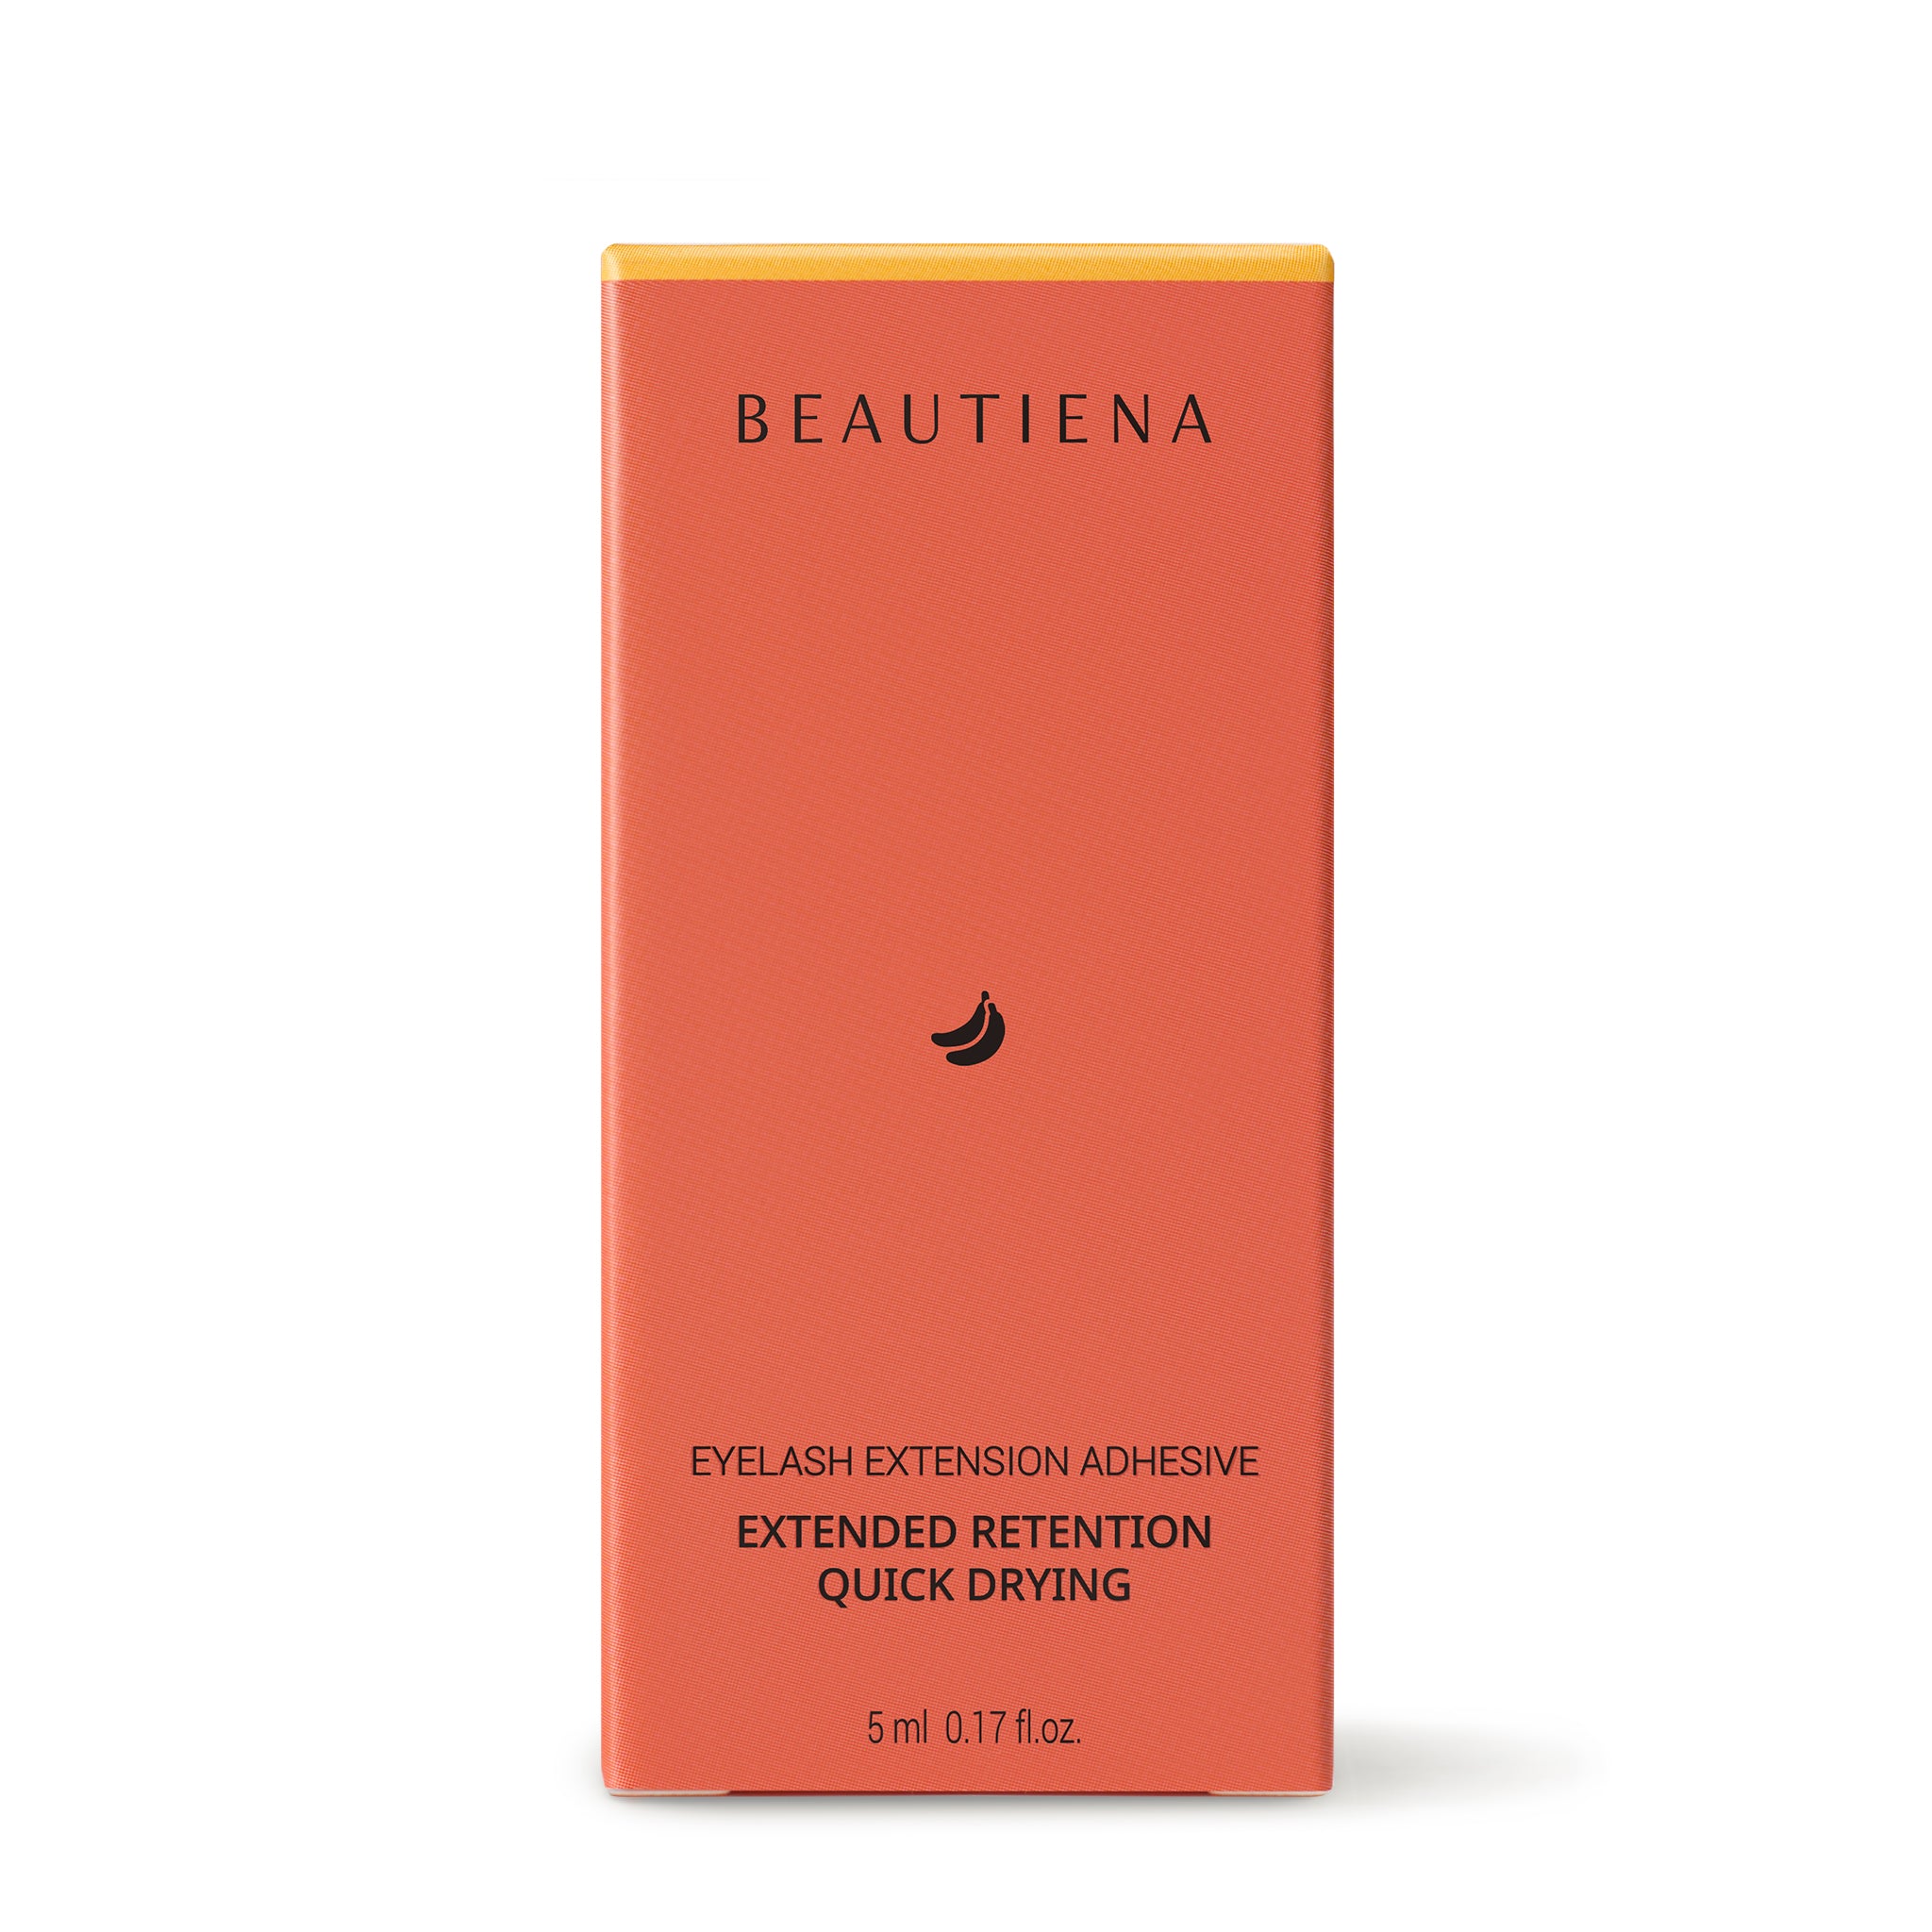 BEAUTÉ Essential Glue (Banana) offers remarkable retention up to 7 weeks and a quick drying time of 1.0 - 2.0 seconds. Not only harmful materials such as latex and formaldehyde are used but no animal test is done as well. The glue provides lower fume which helps customers a better experience.